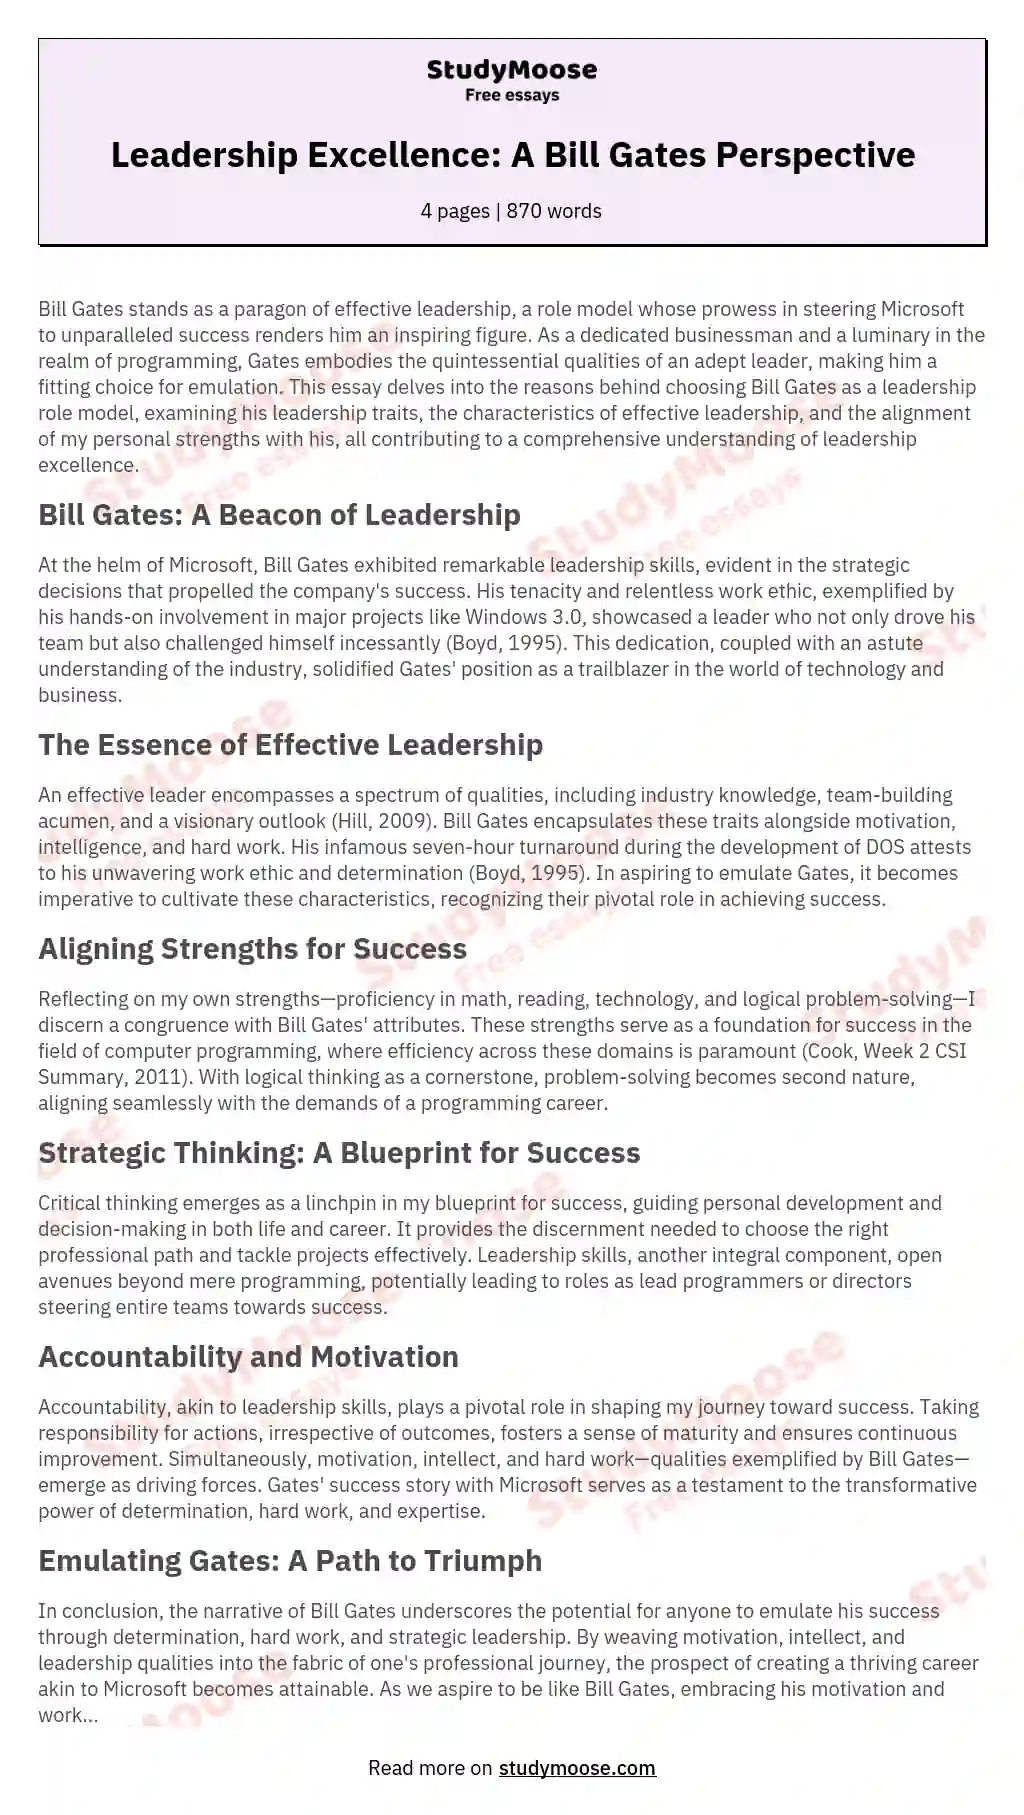 Leadership Excellence: A Bill Gates Perspective essay